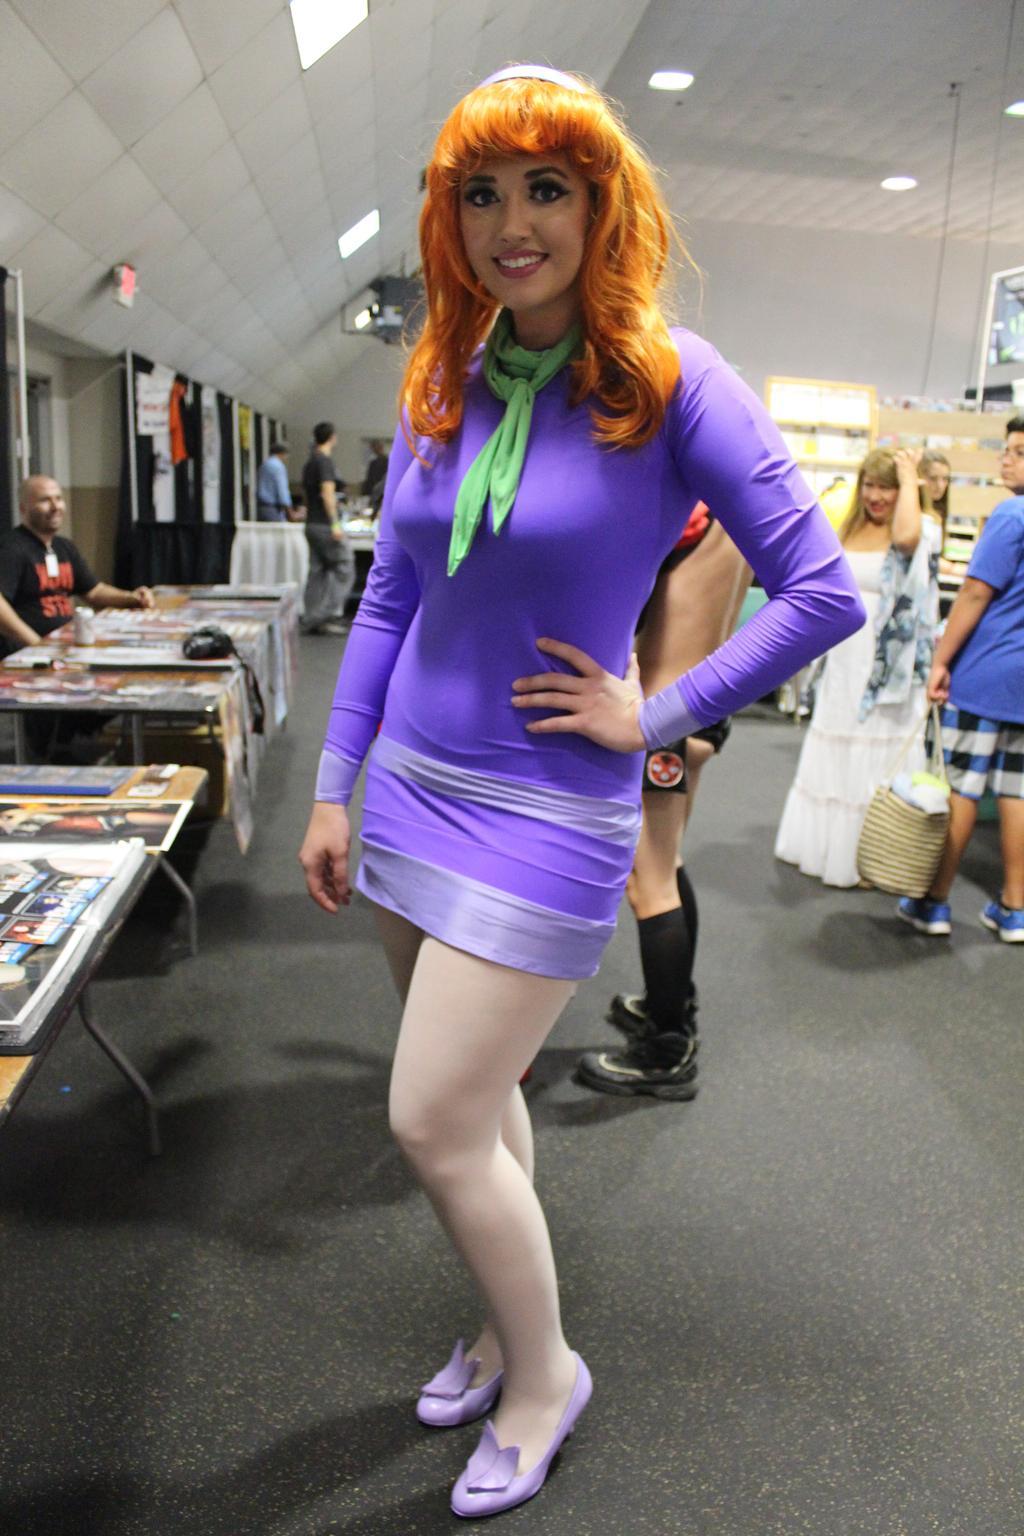 70+ Hot Pictures Of Daphne Blake From Scooby Doo Which Are Sure to Catch Your Attention 18